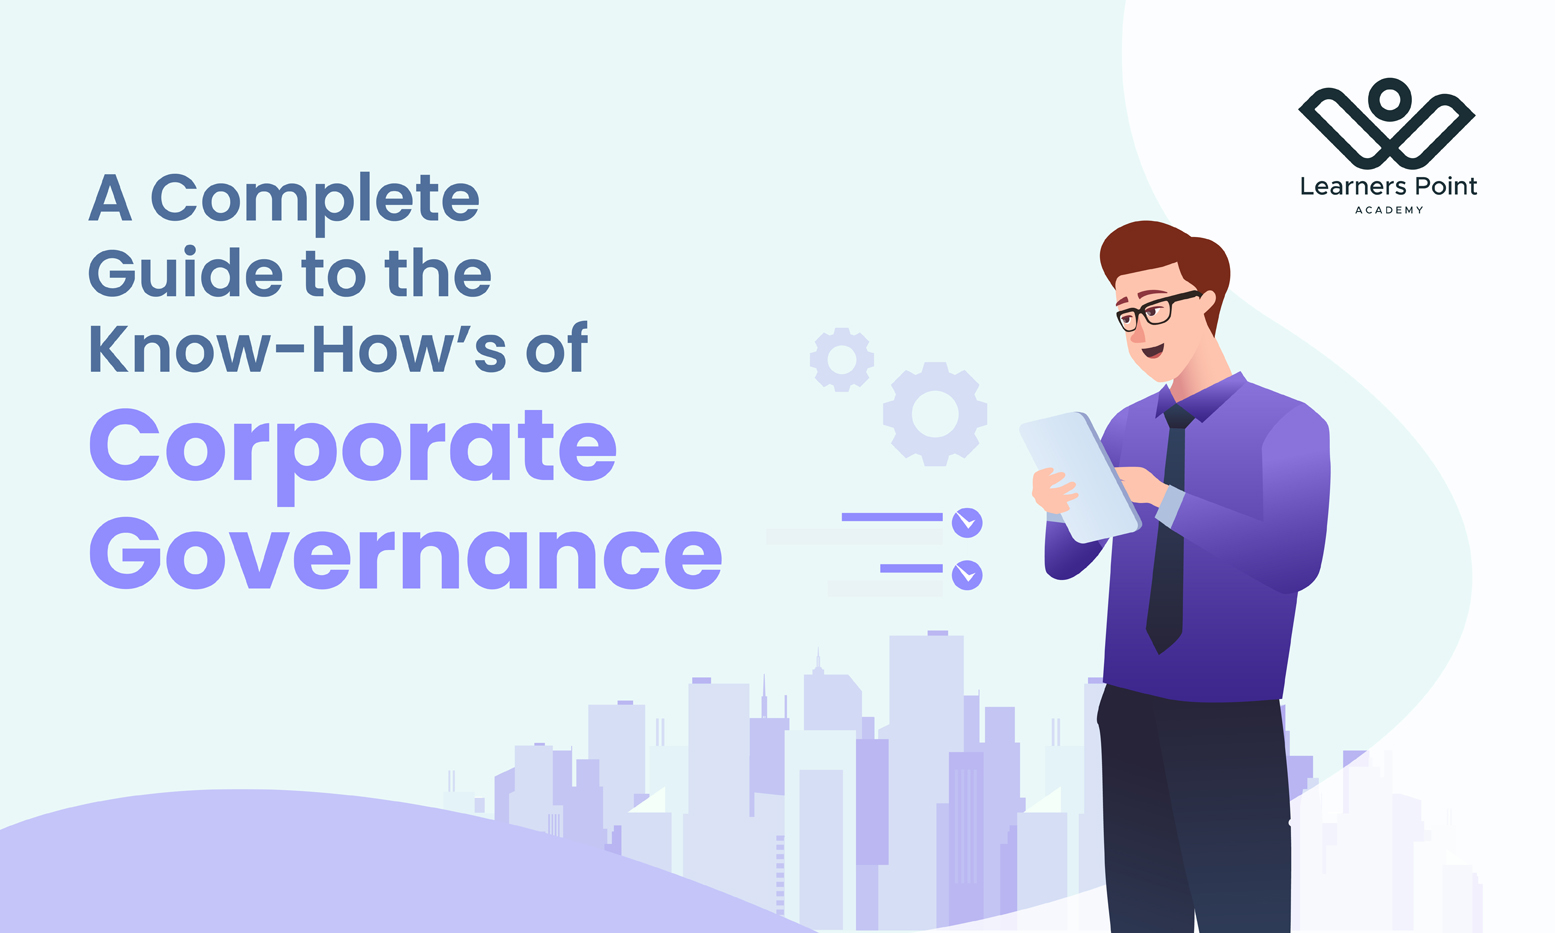 A Complete Guide to the Know-How’s of Corporate Governance